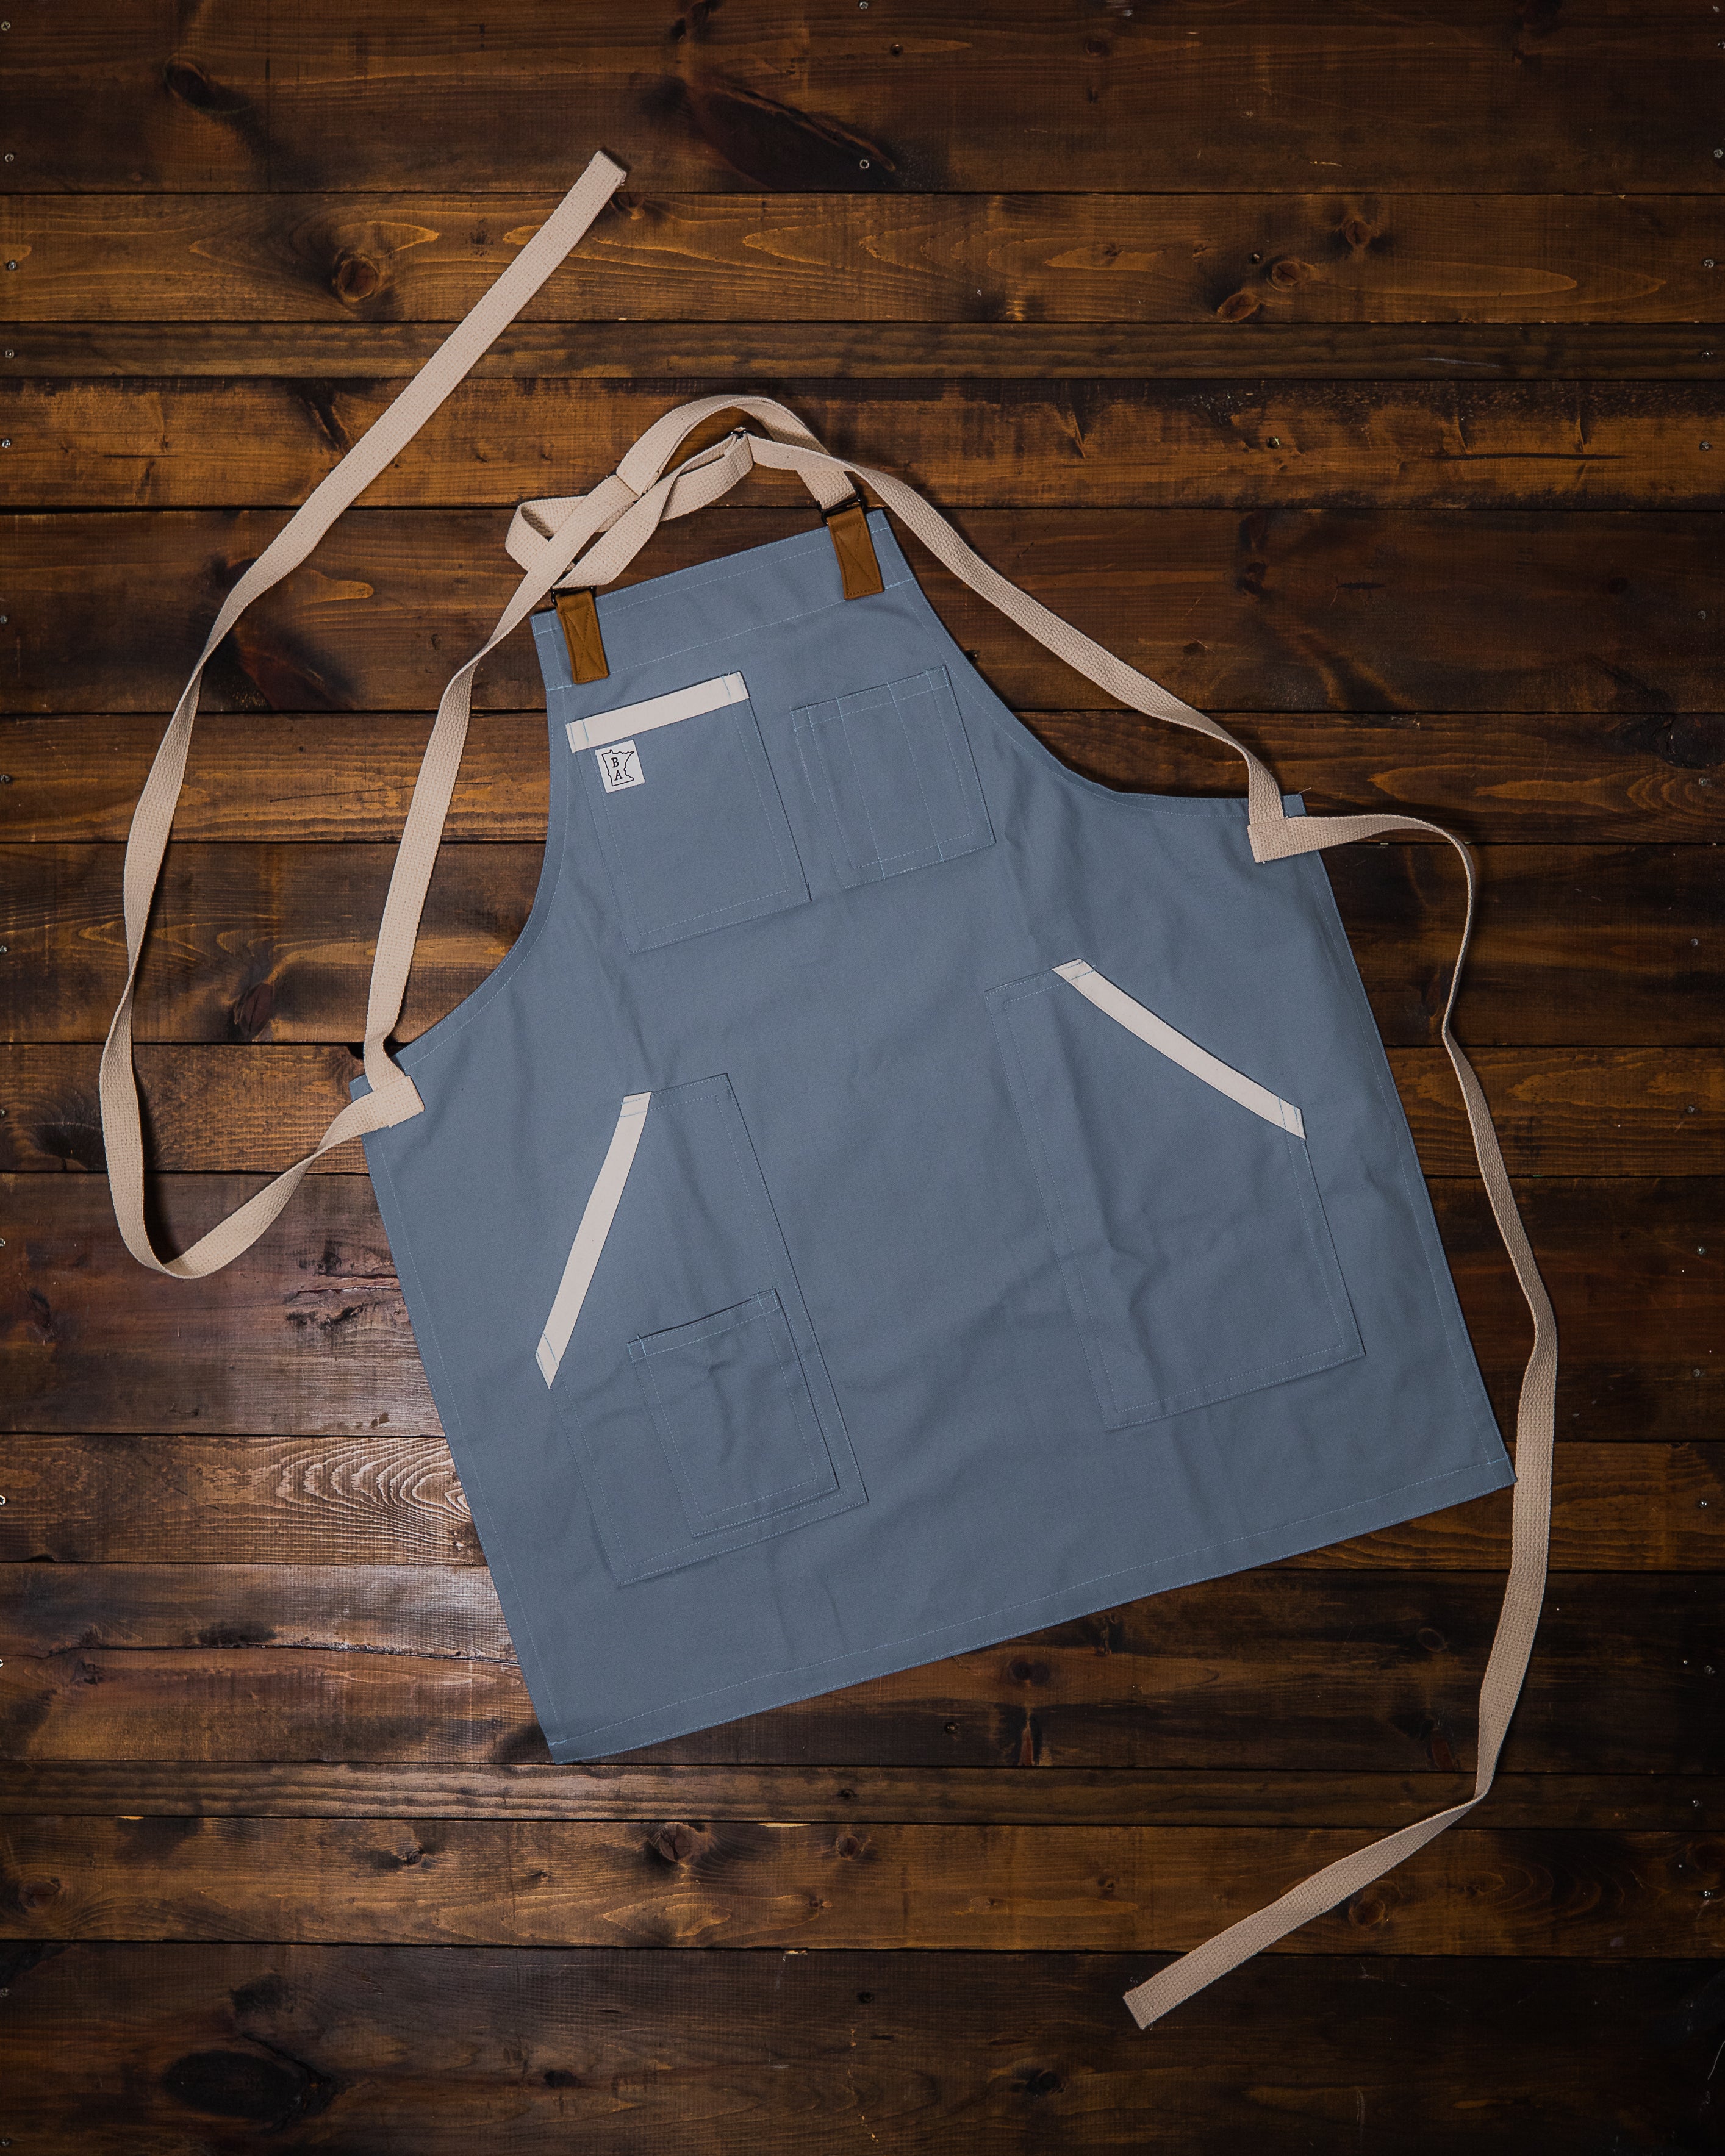 Cotton apron designed from 10oz duck cloth and has a muted blue base, cream accents on the pockets, and cream colored strapping laid out flat on a wooden surface. The apron design Blue Opal was manufactured in Minnesota by Craftmade Aprons.